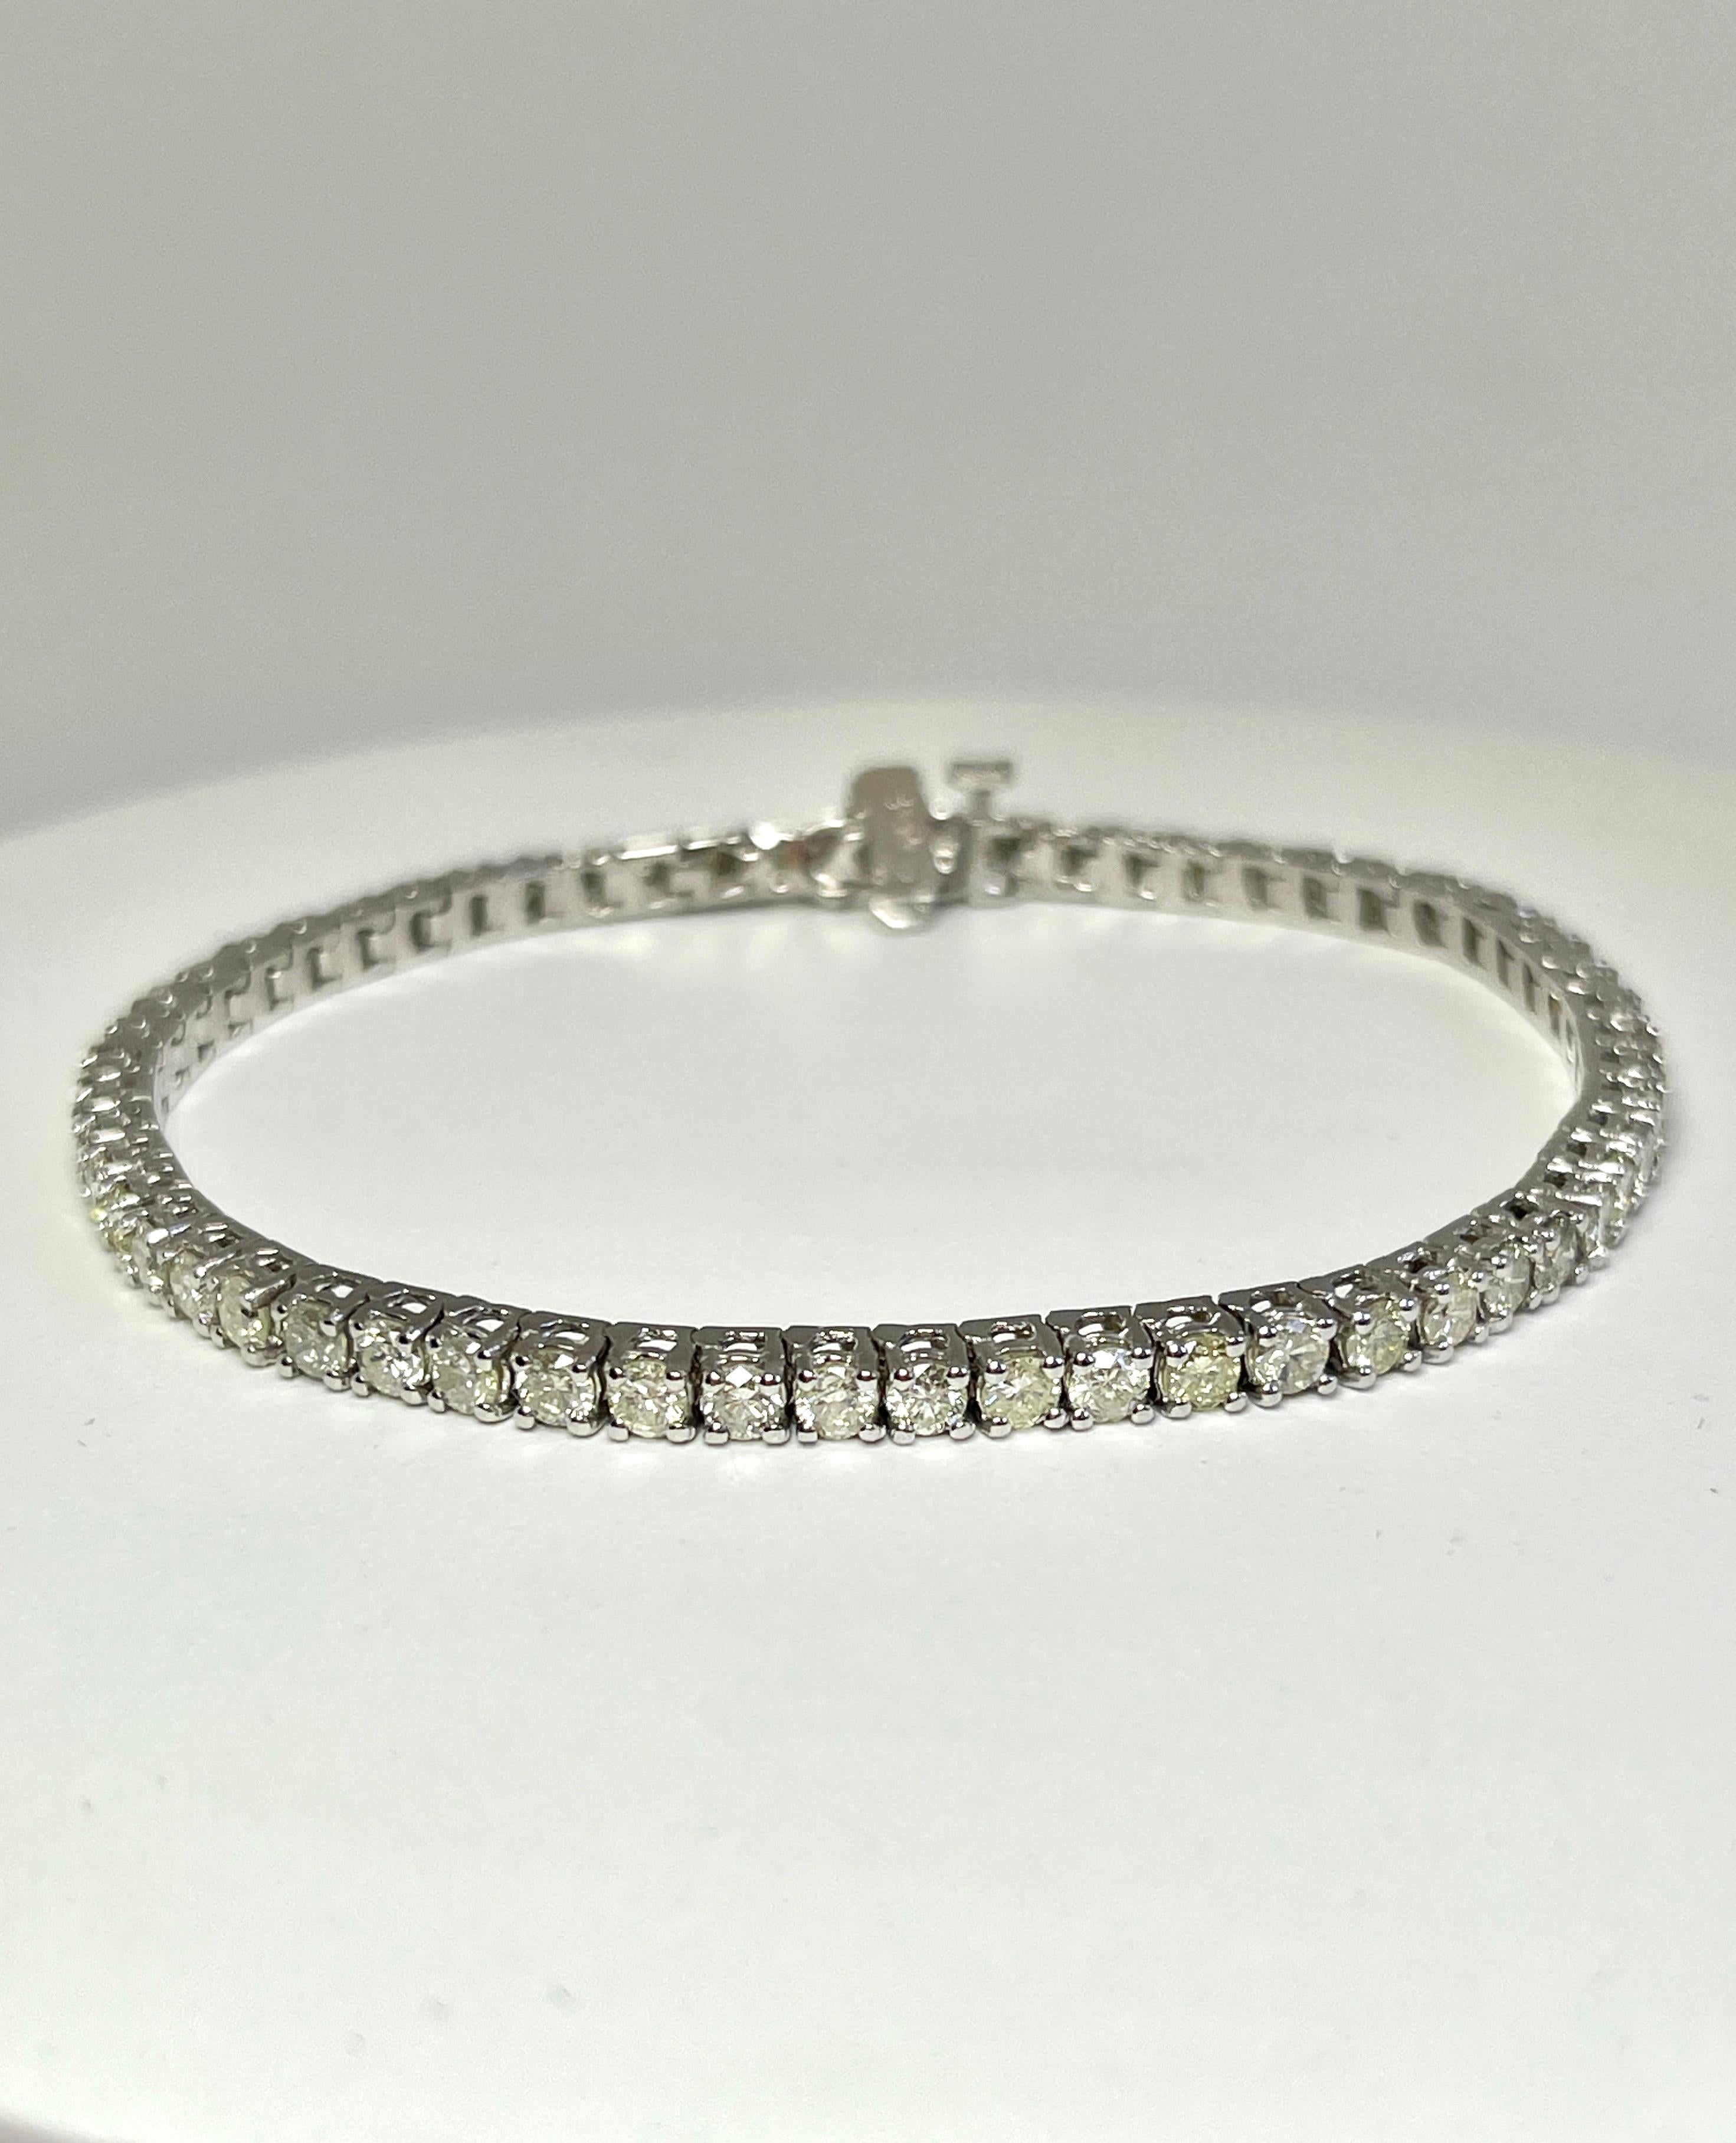 5.02 Carat Round Brilliant Cut Diamond Tennis Bracelet 14 Karat White Gold In New Condition For Sale In Great Neck, NY